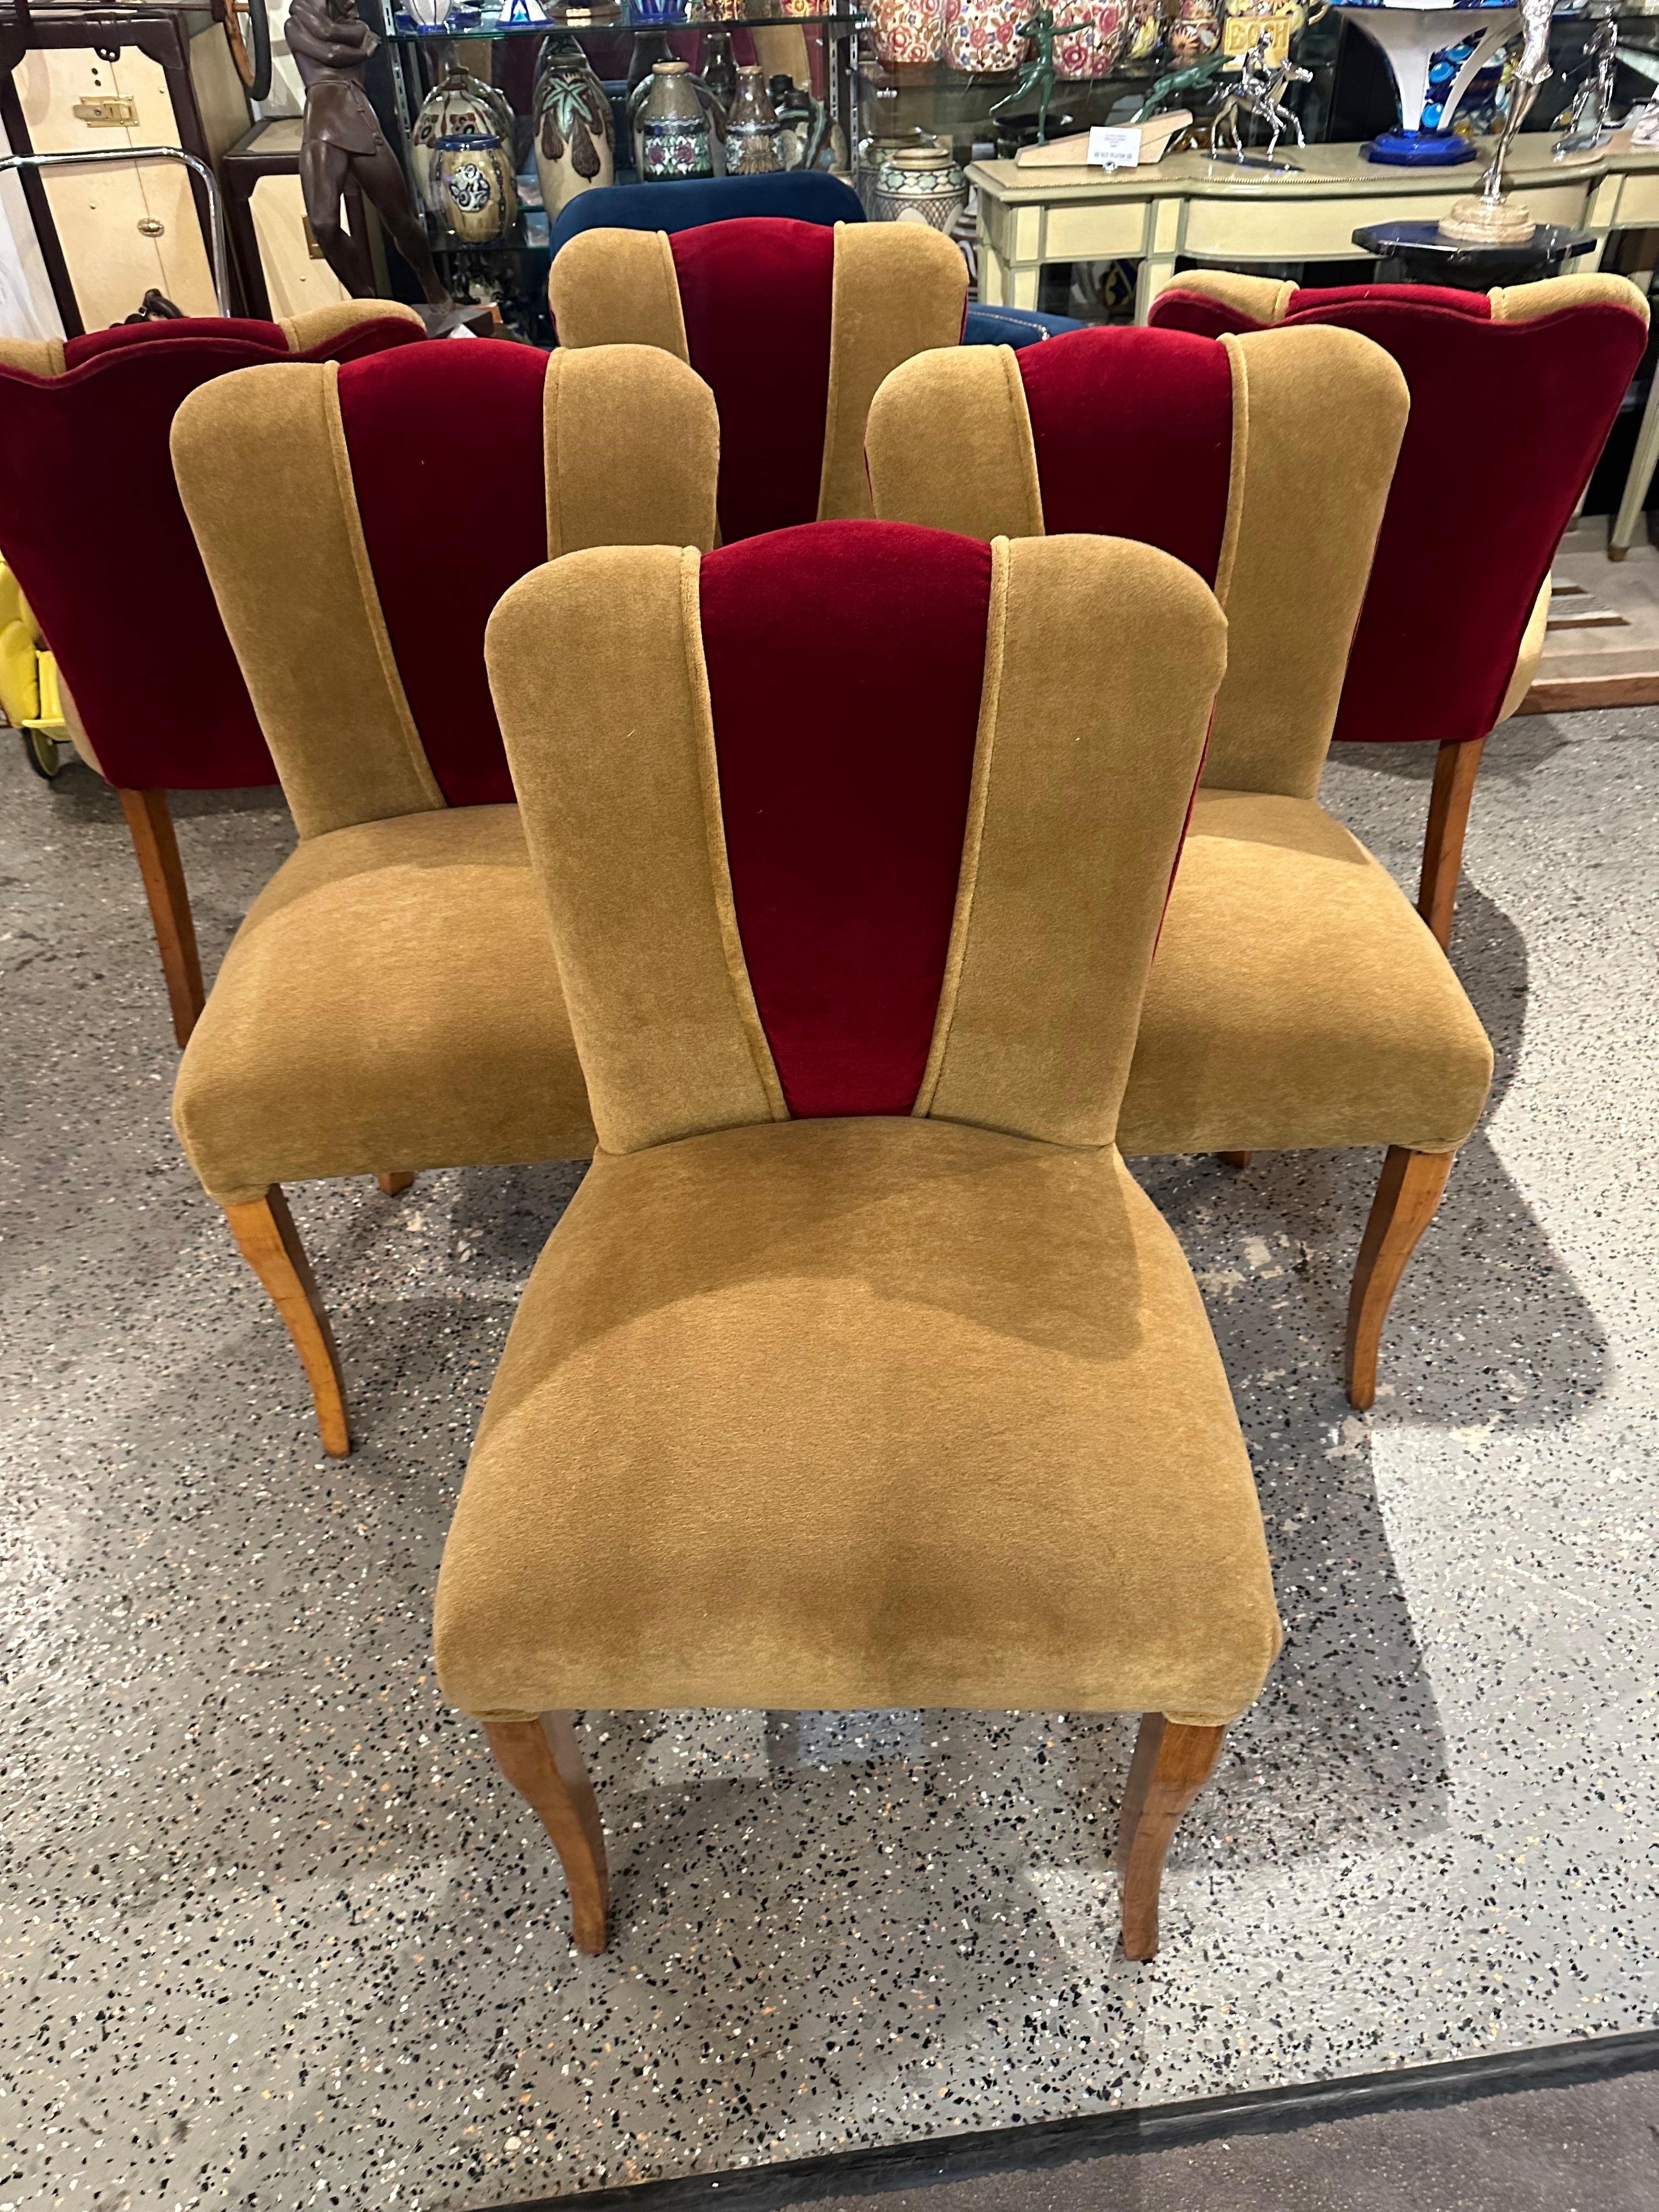 Art Deco dining room or side chairs French Style Mohair. Two-tone mohair in light tan and deep burgundy with a natural wood finish. Newly reupholstered, padded, and reglued to make these ready for another 50 years of use.

Very comfortable, and